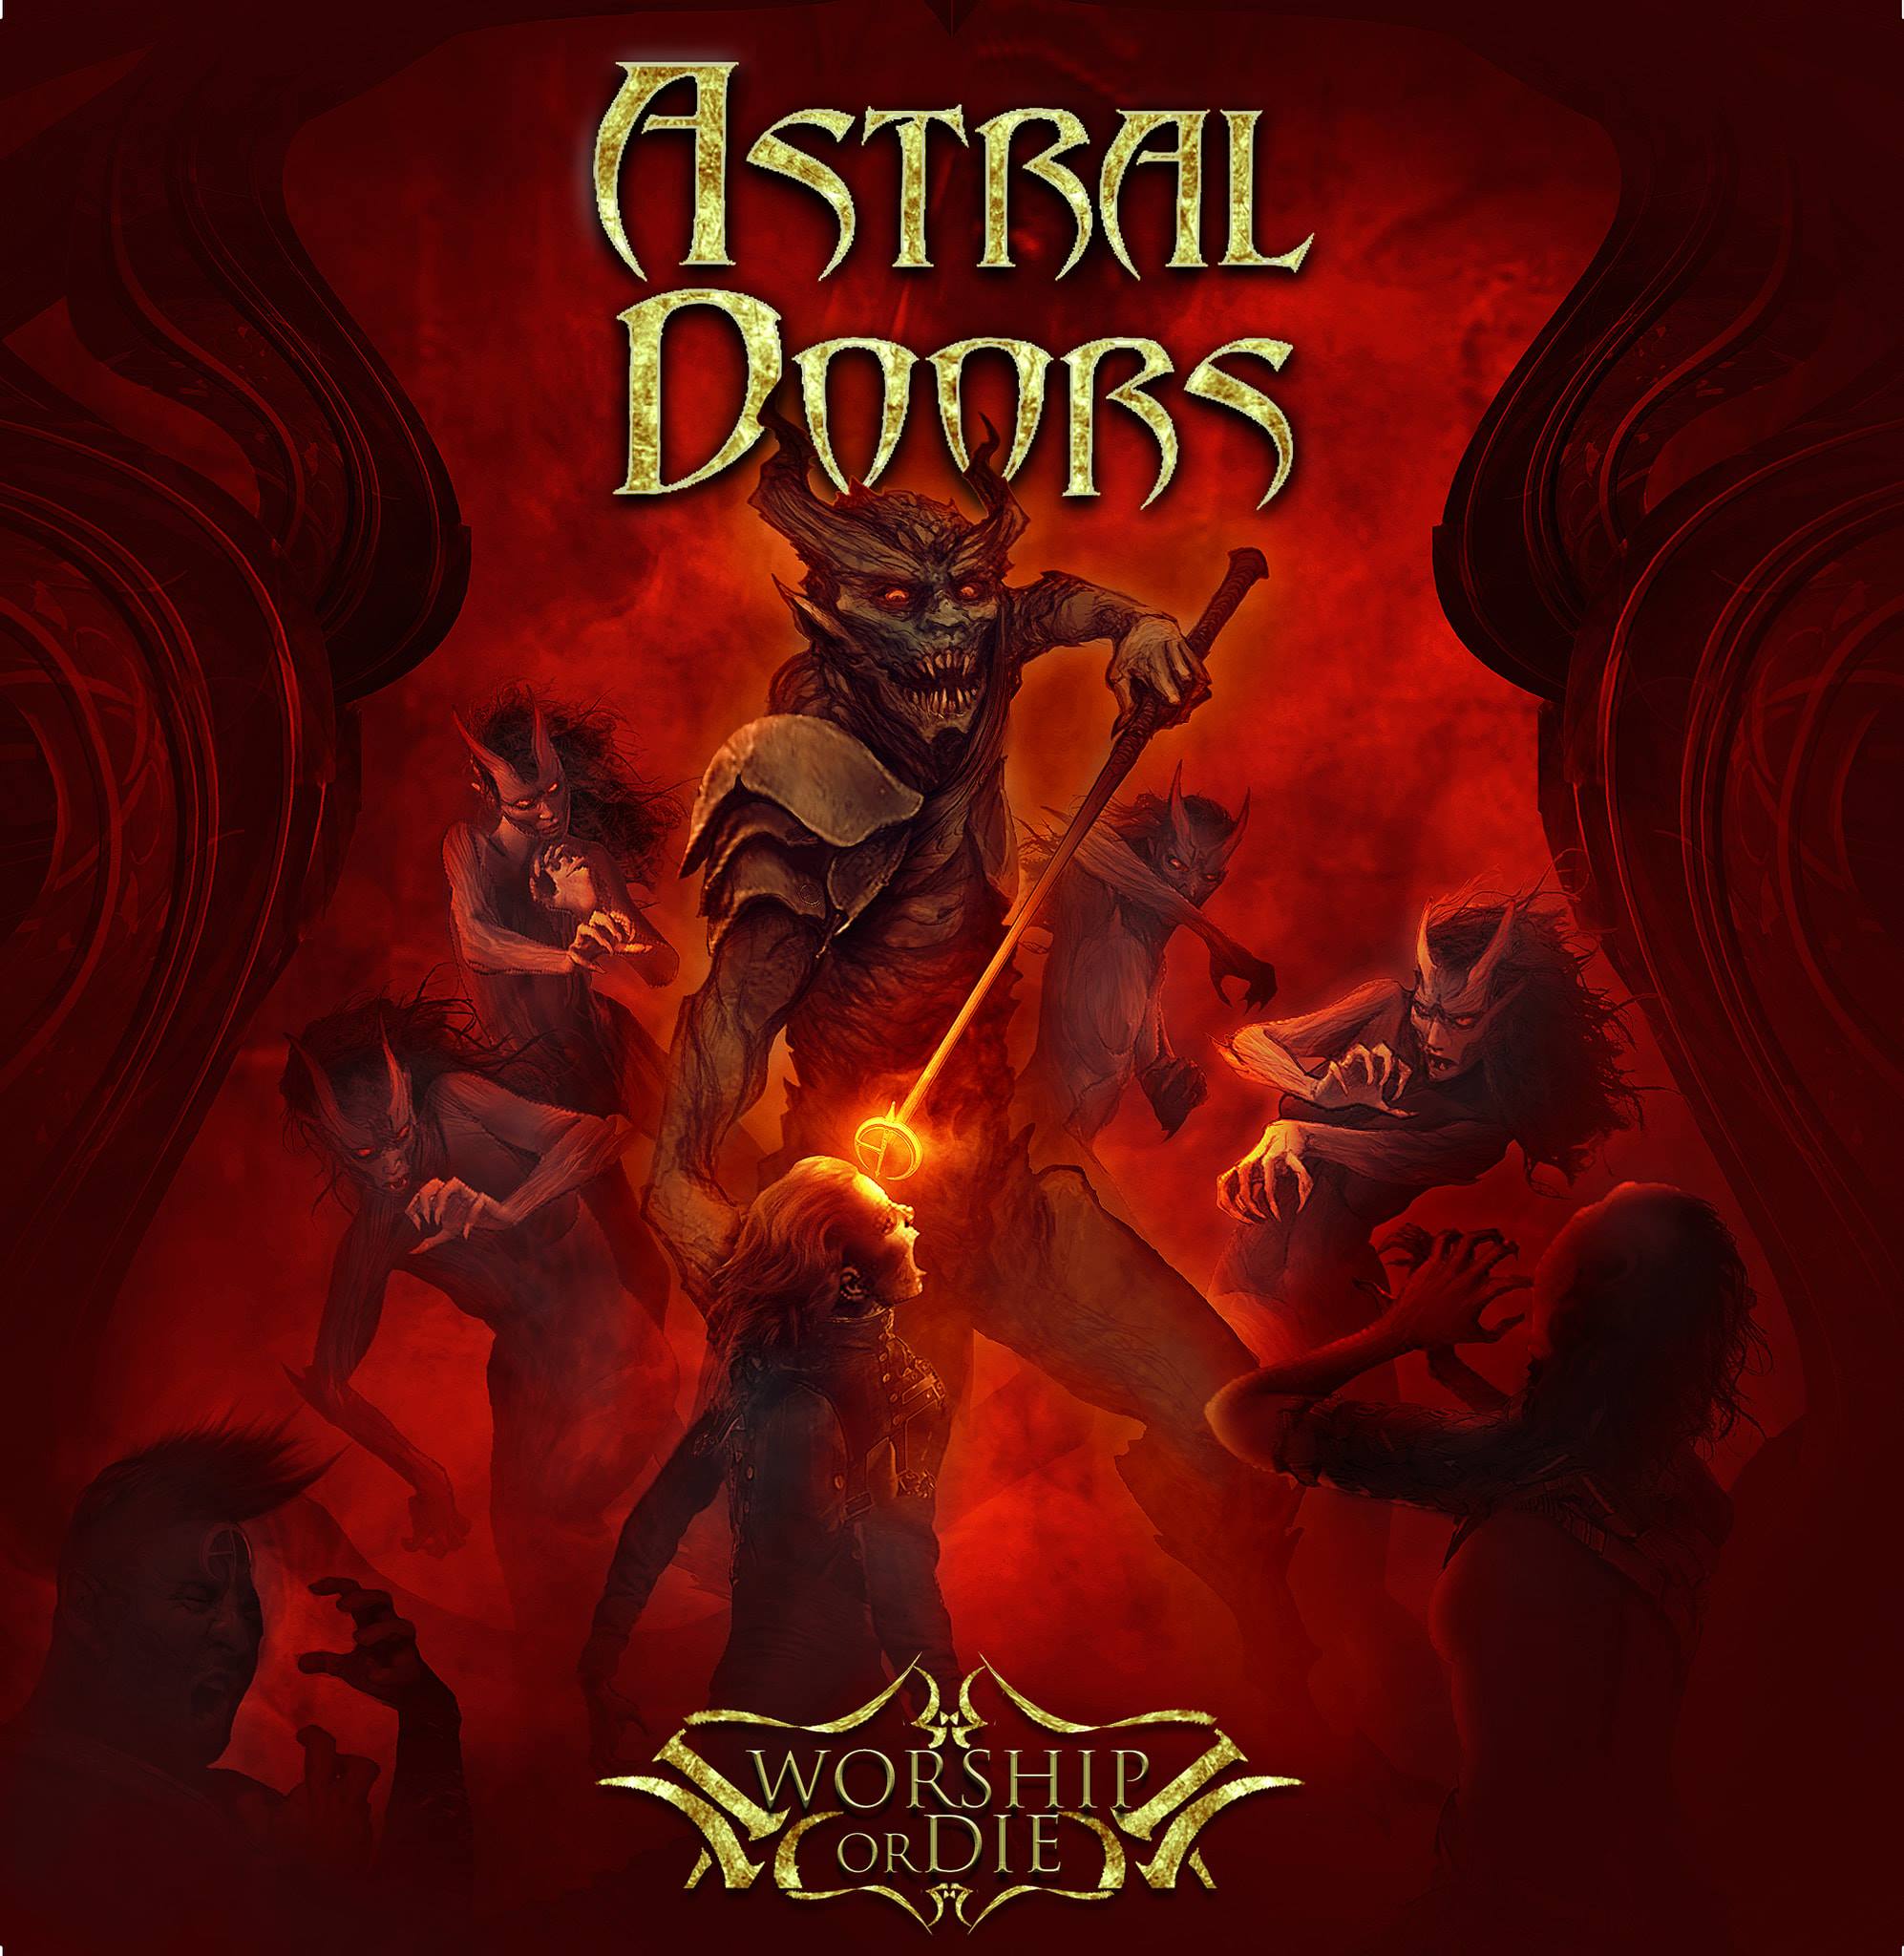 Astral Doors - Night of The Hunter (clip)